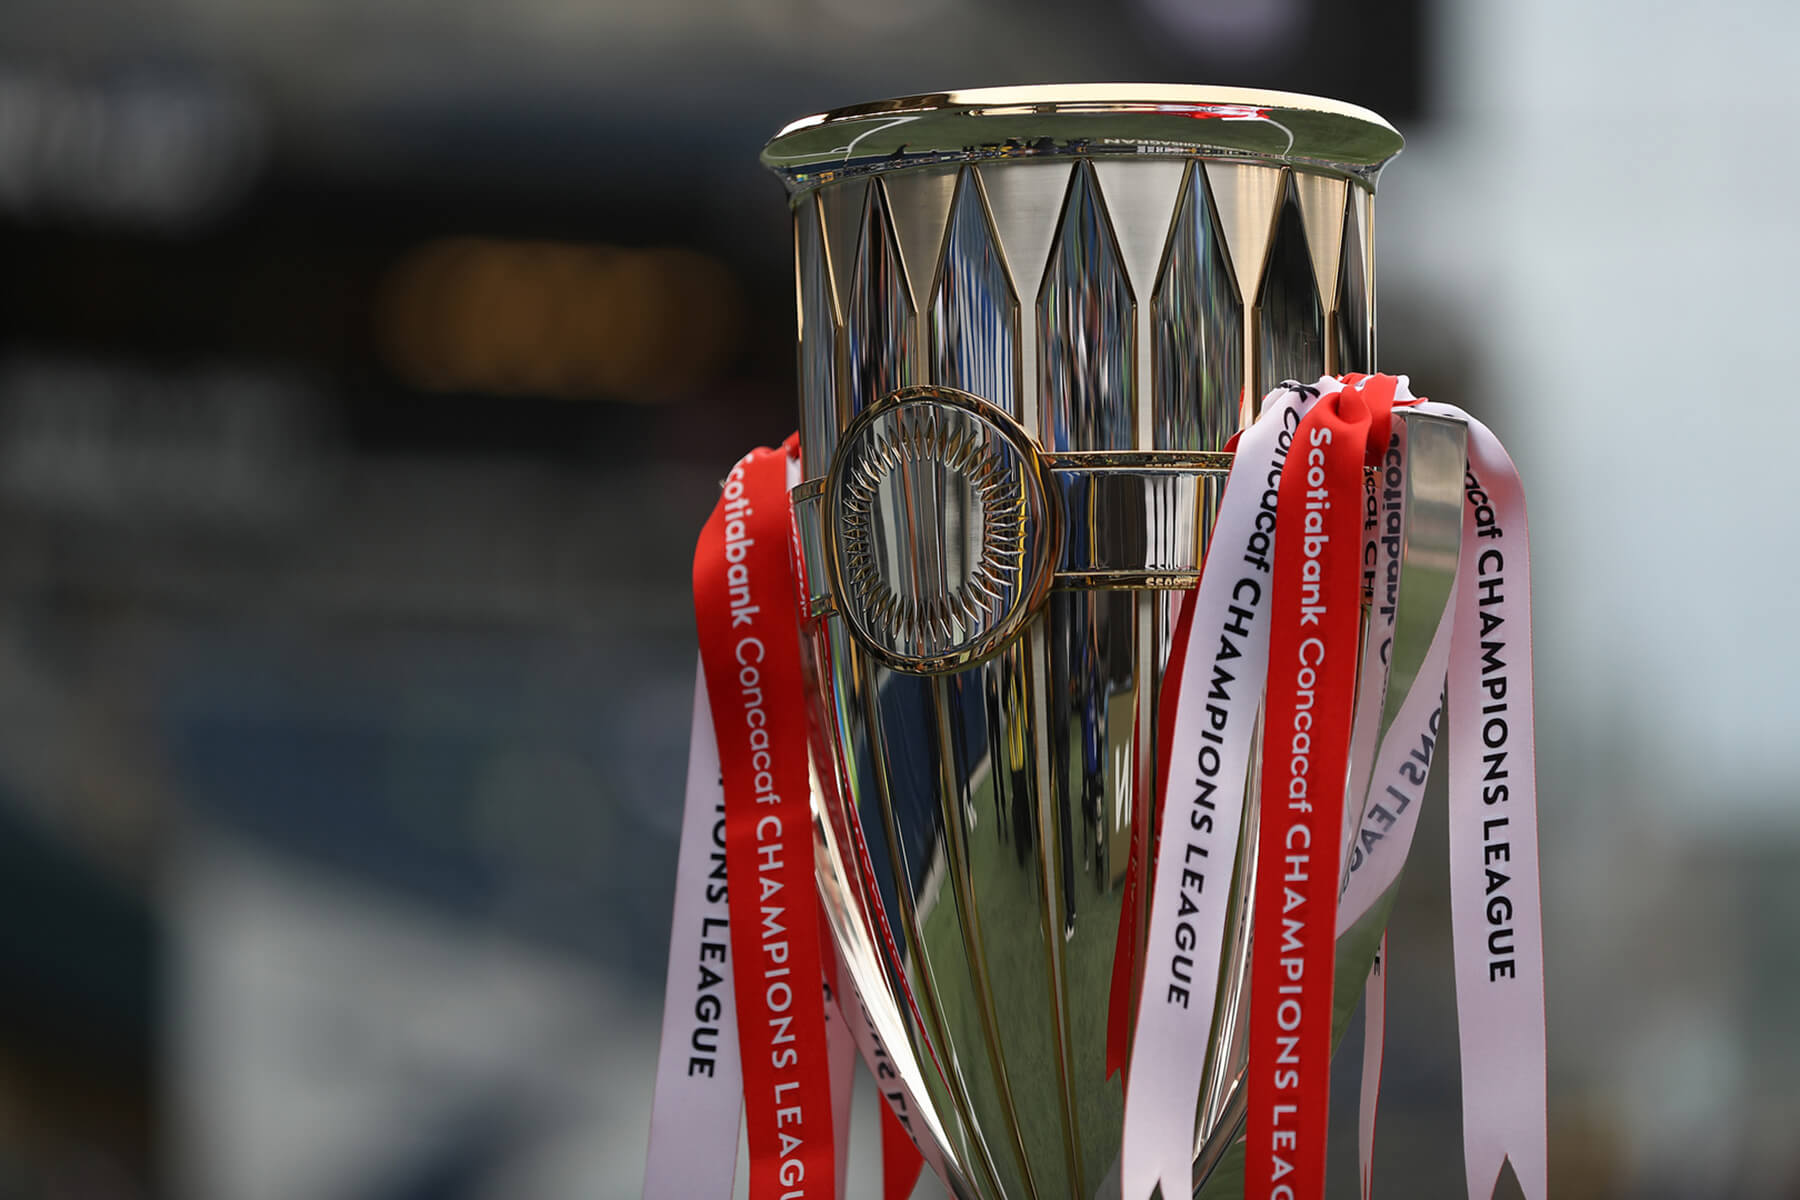 Schedule Announced For 2023 Scotiabank Concacaf Champions League  Quarterfinals